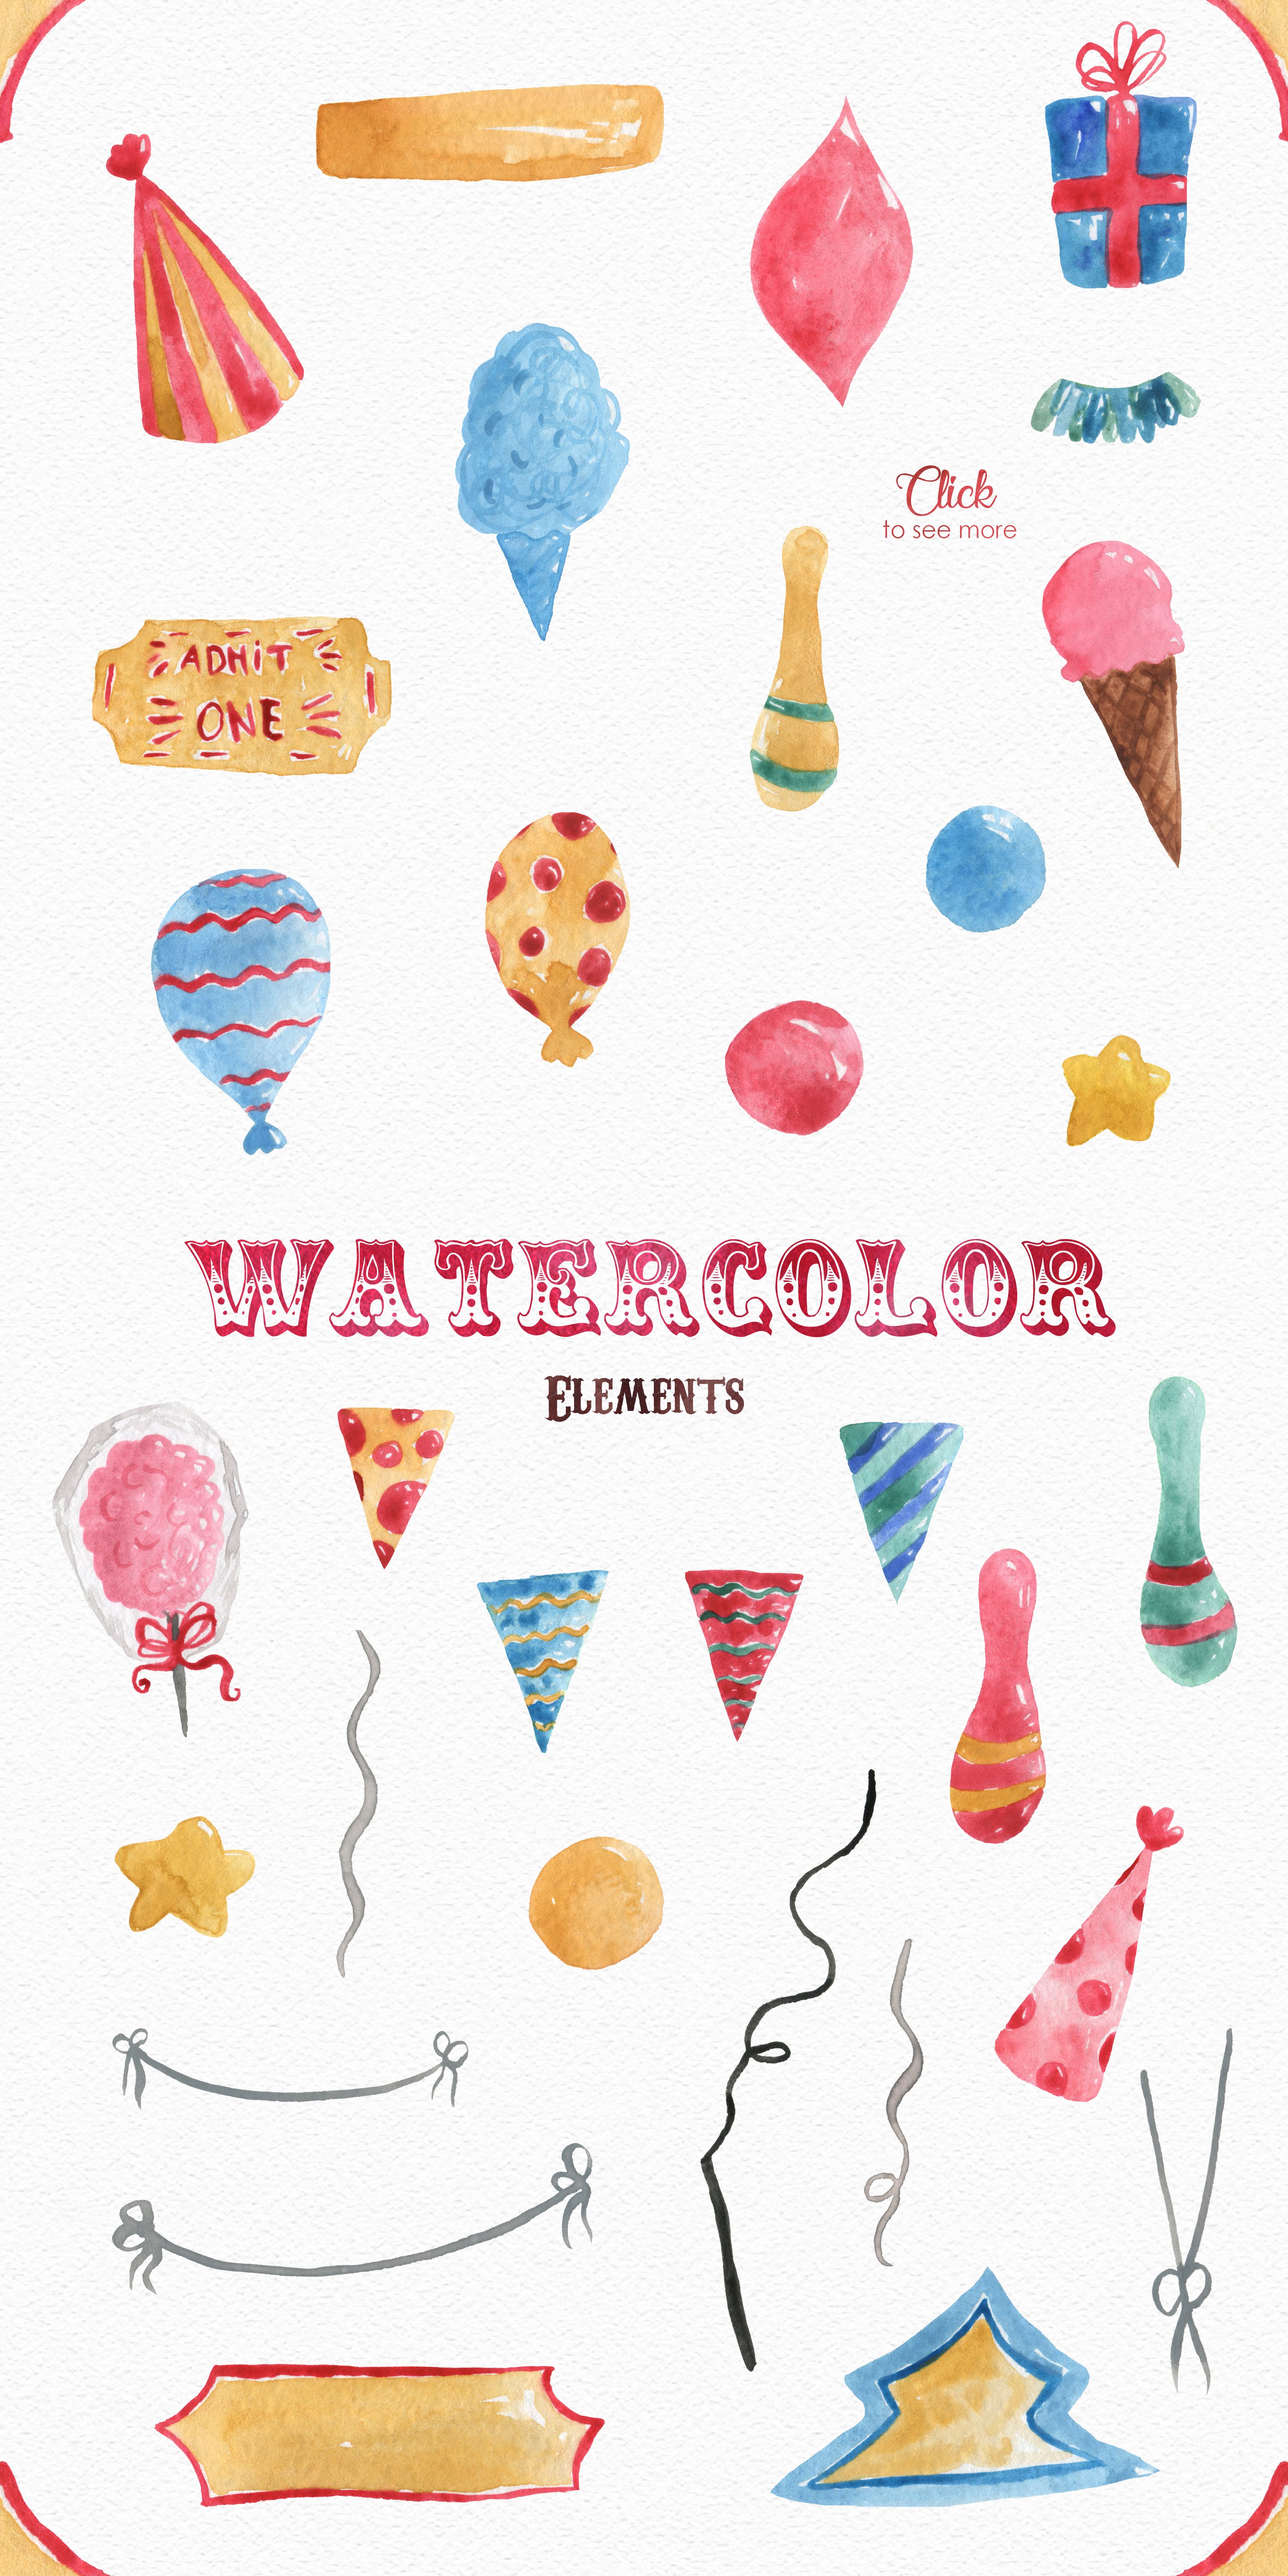 Watercolor themed elements preview.